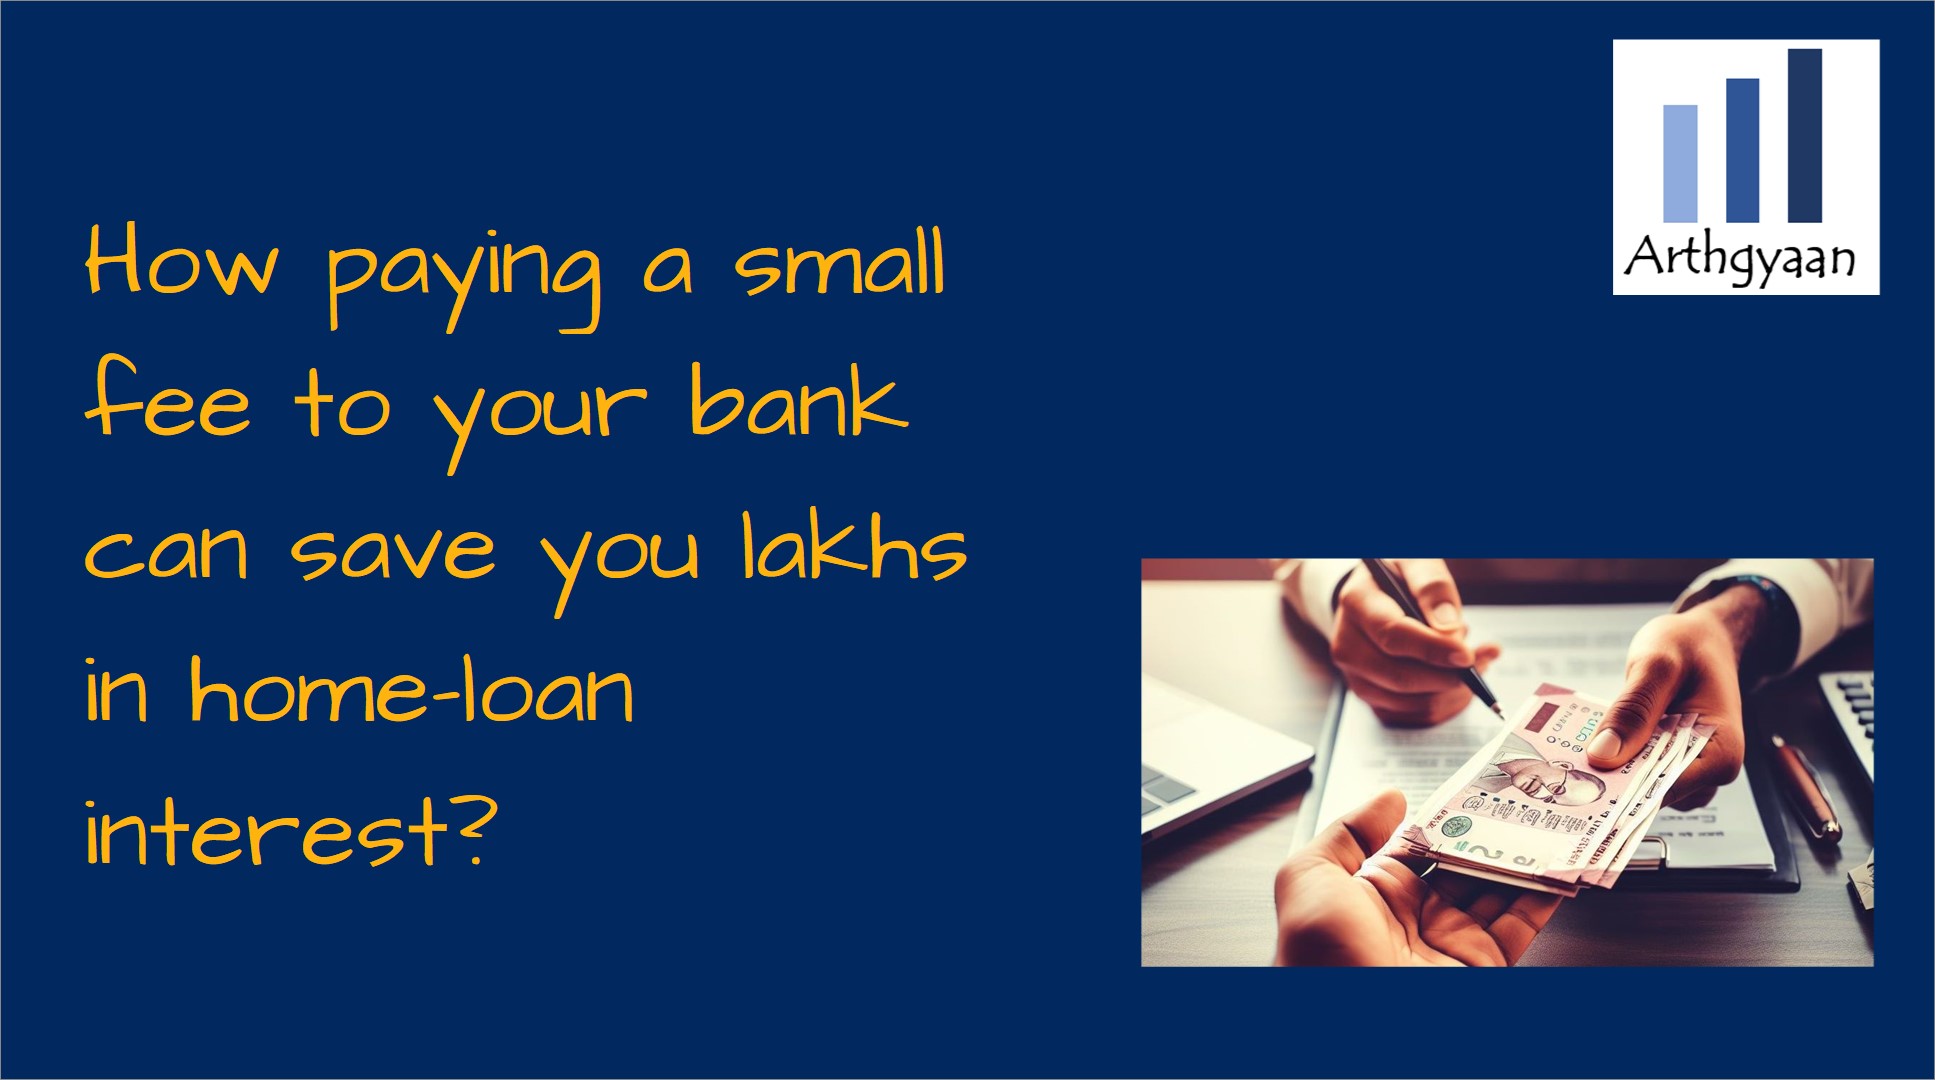 How paying a small fee to your bank can save you lakhs in home-loan interest?